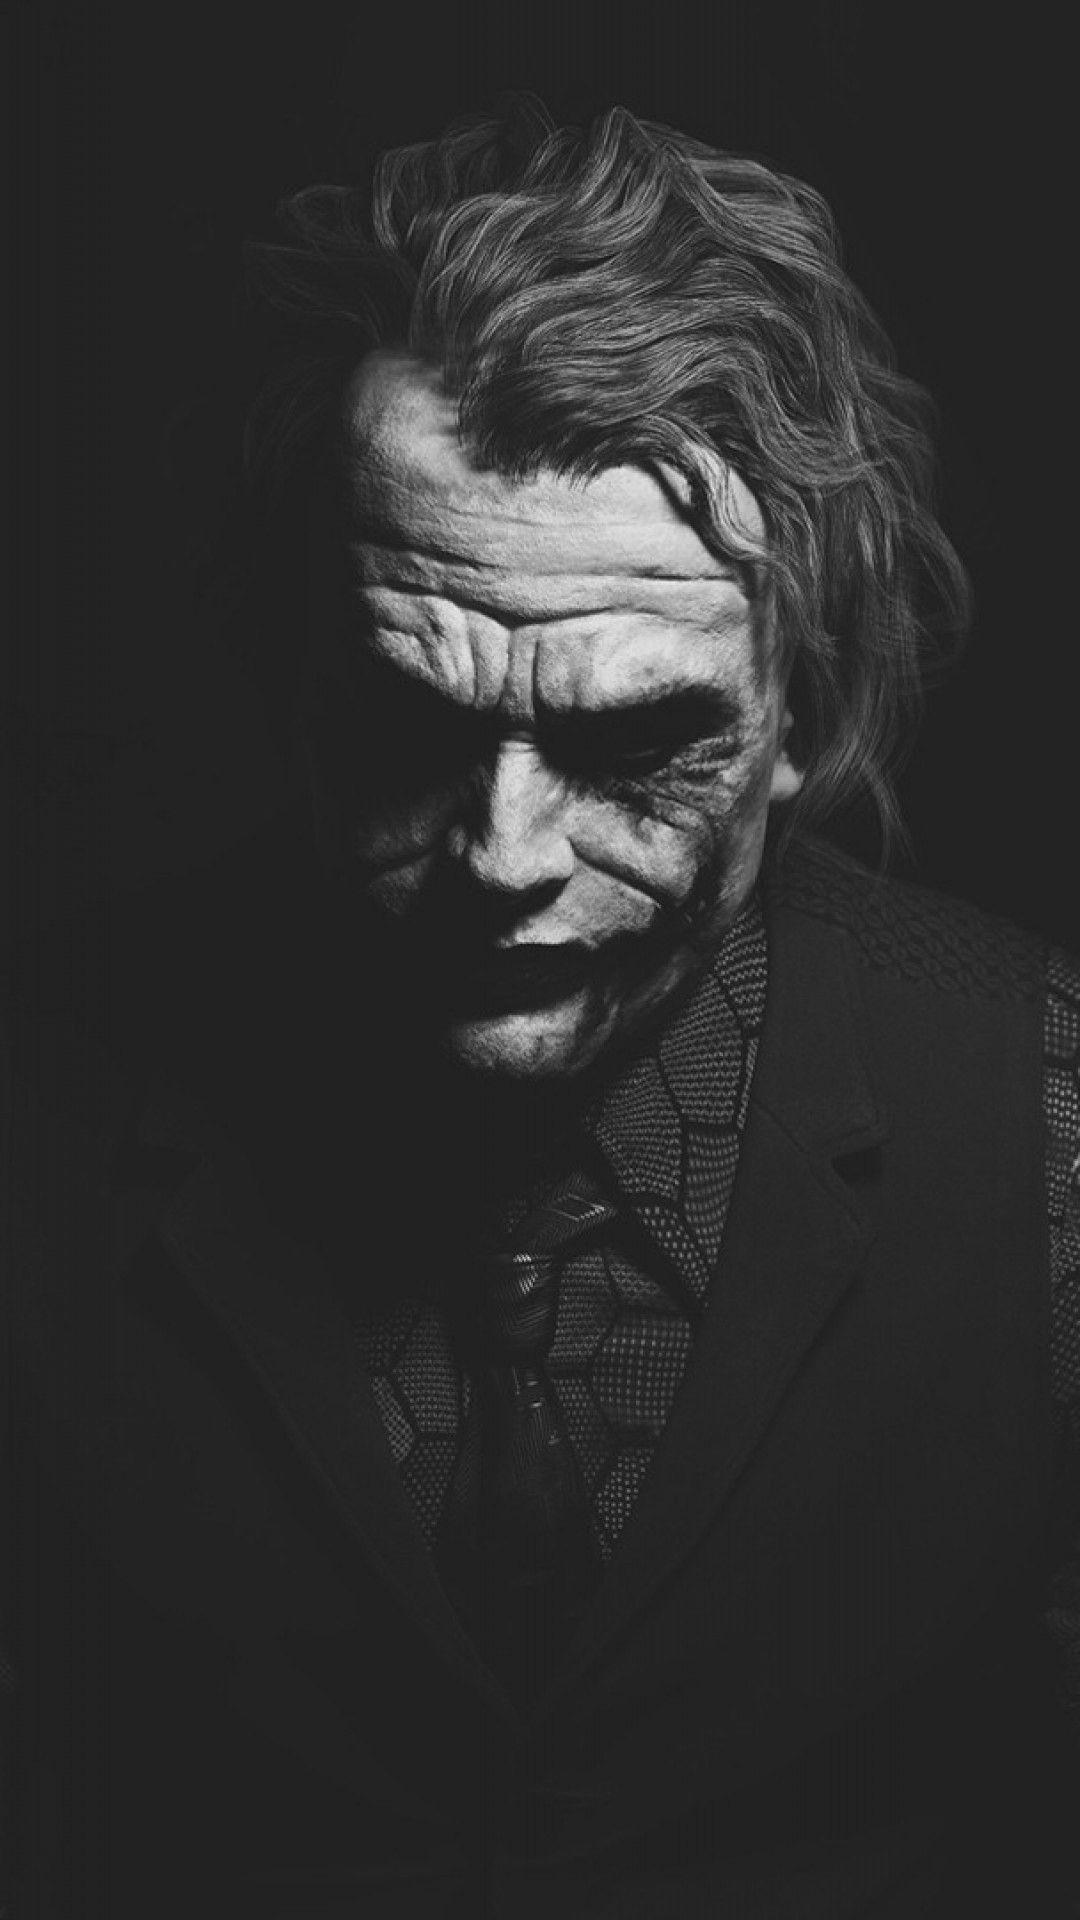 Why So Serious Joker Mobile Wallpapers - Wallpaper Cave